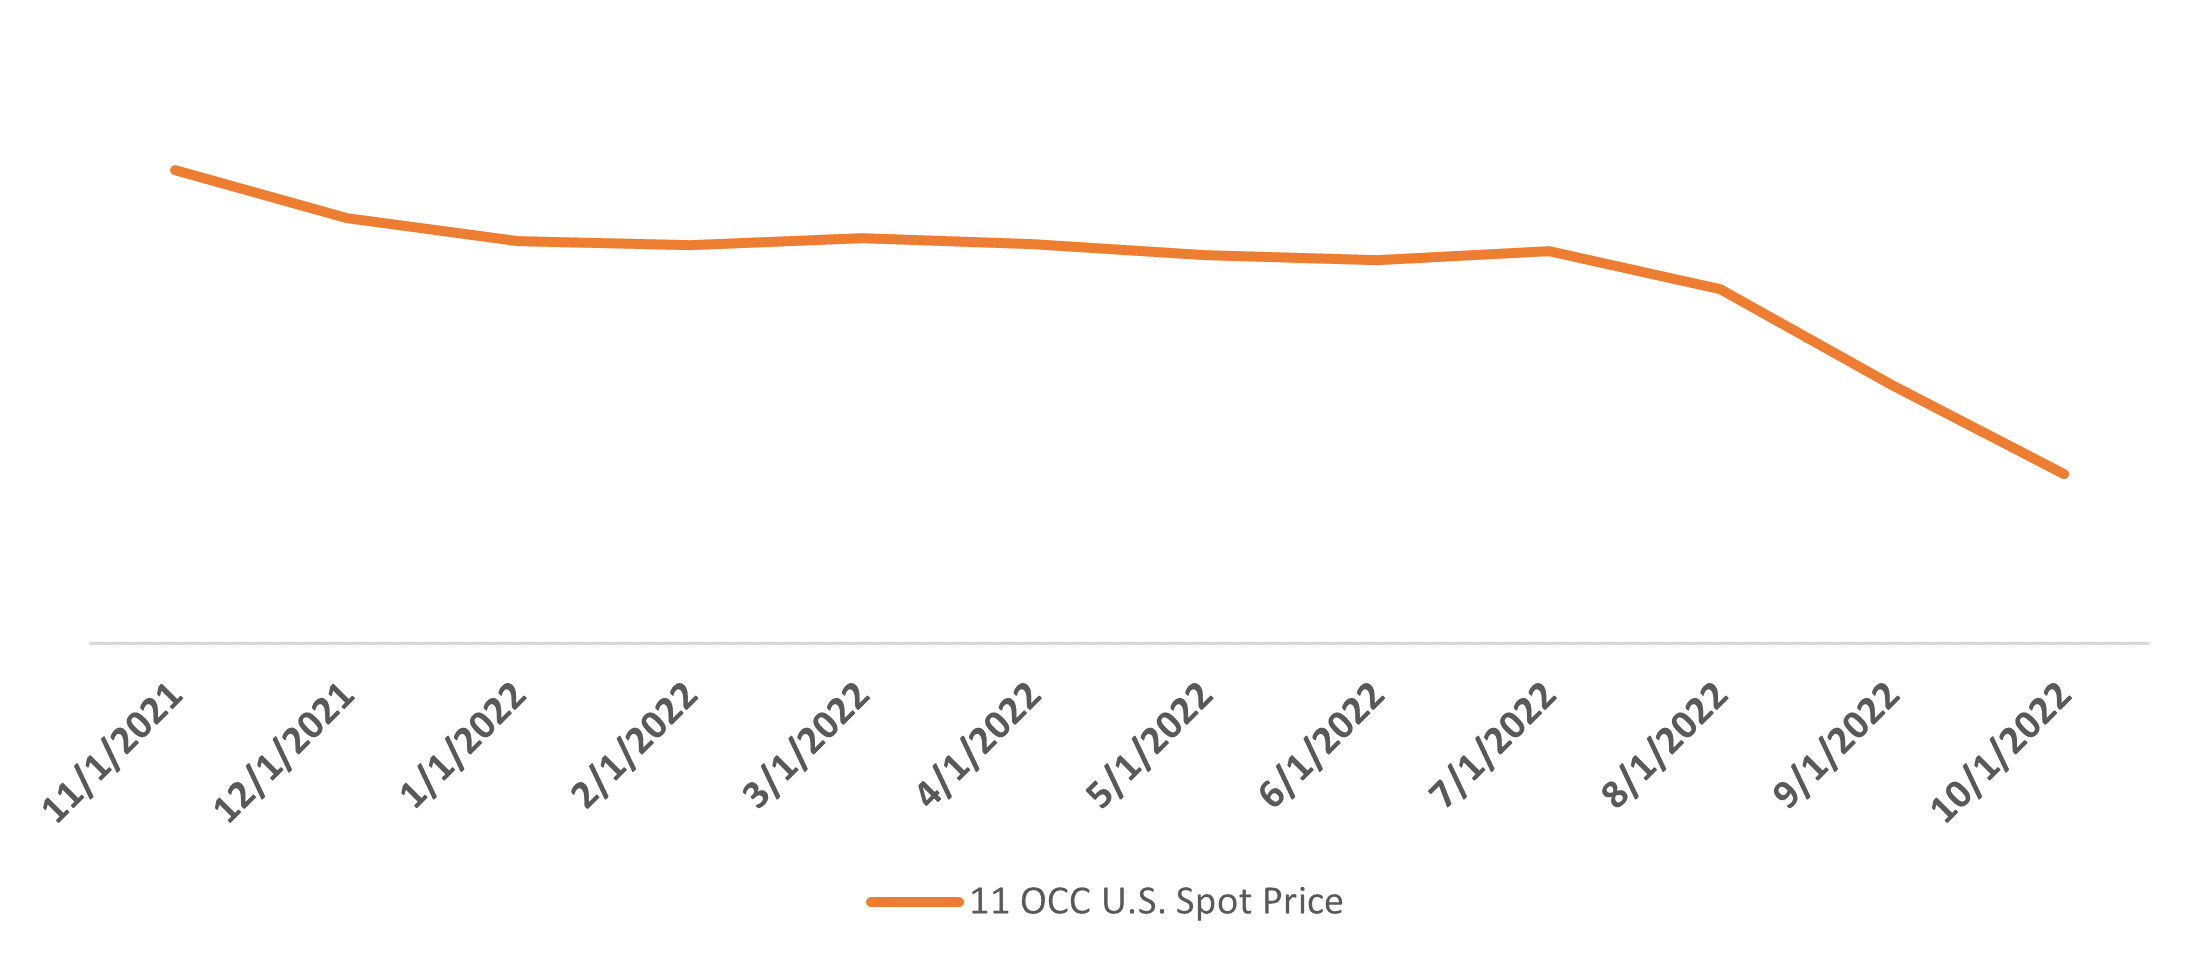 Analyzing the US OCC Supply Curve